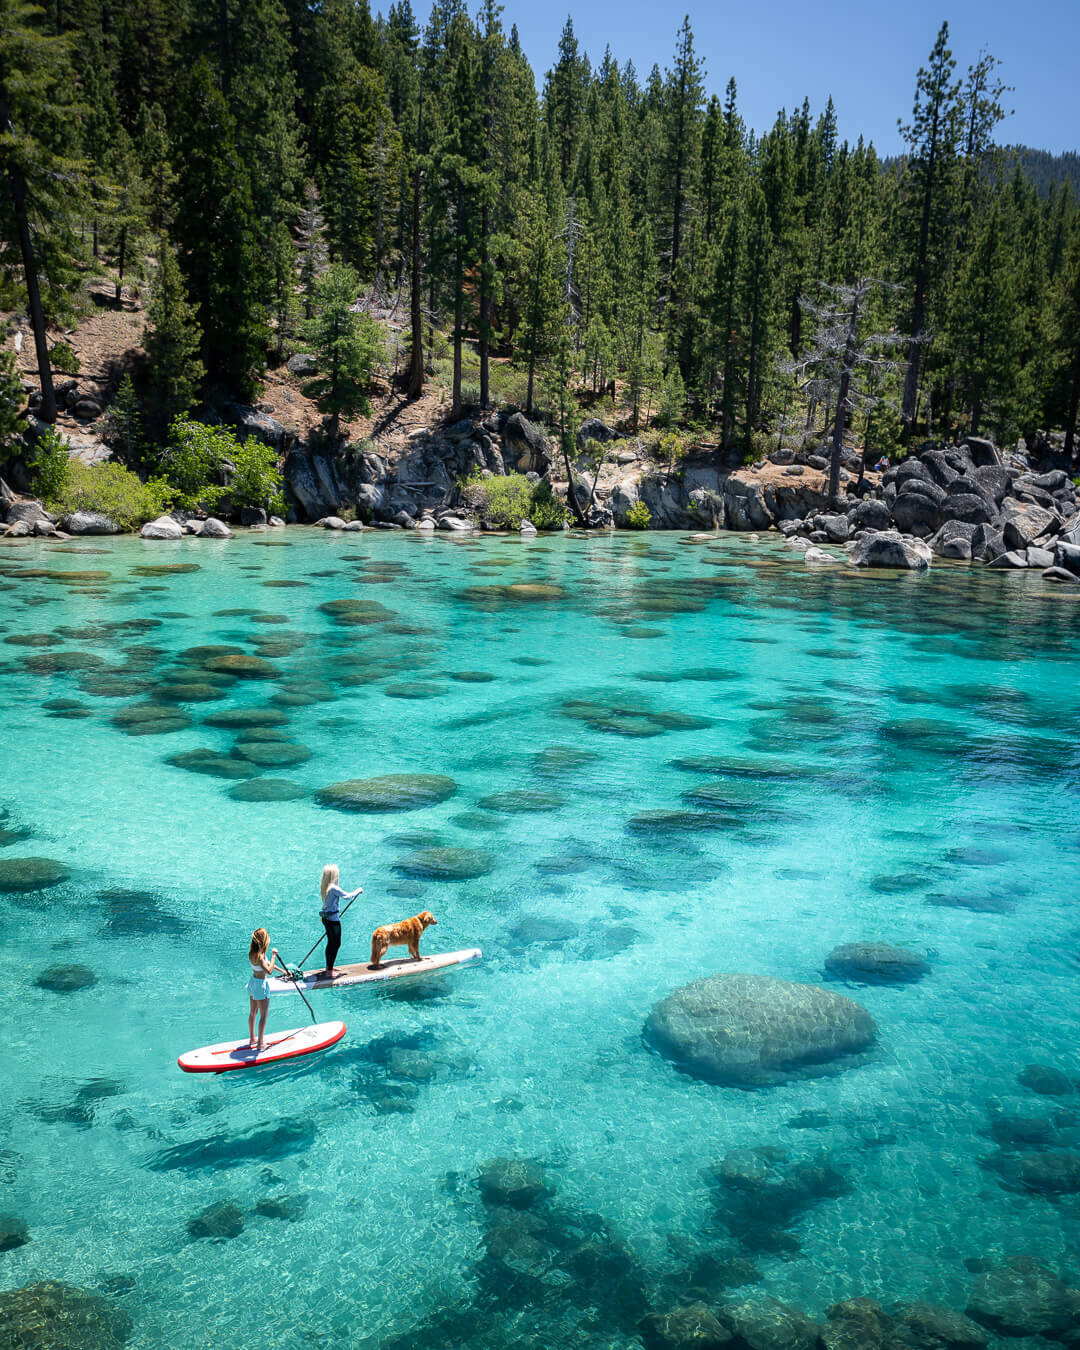 Paddle boarding with friends at Secret Cove, Lake Tahoe.